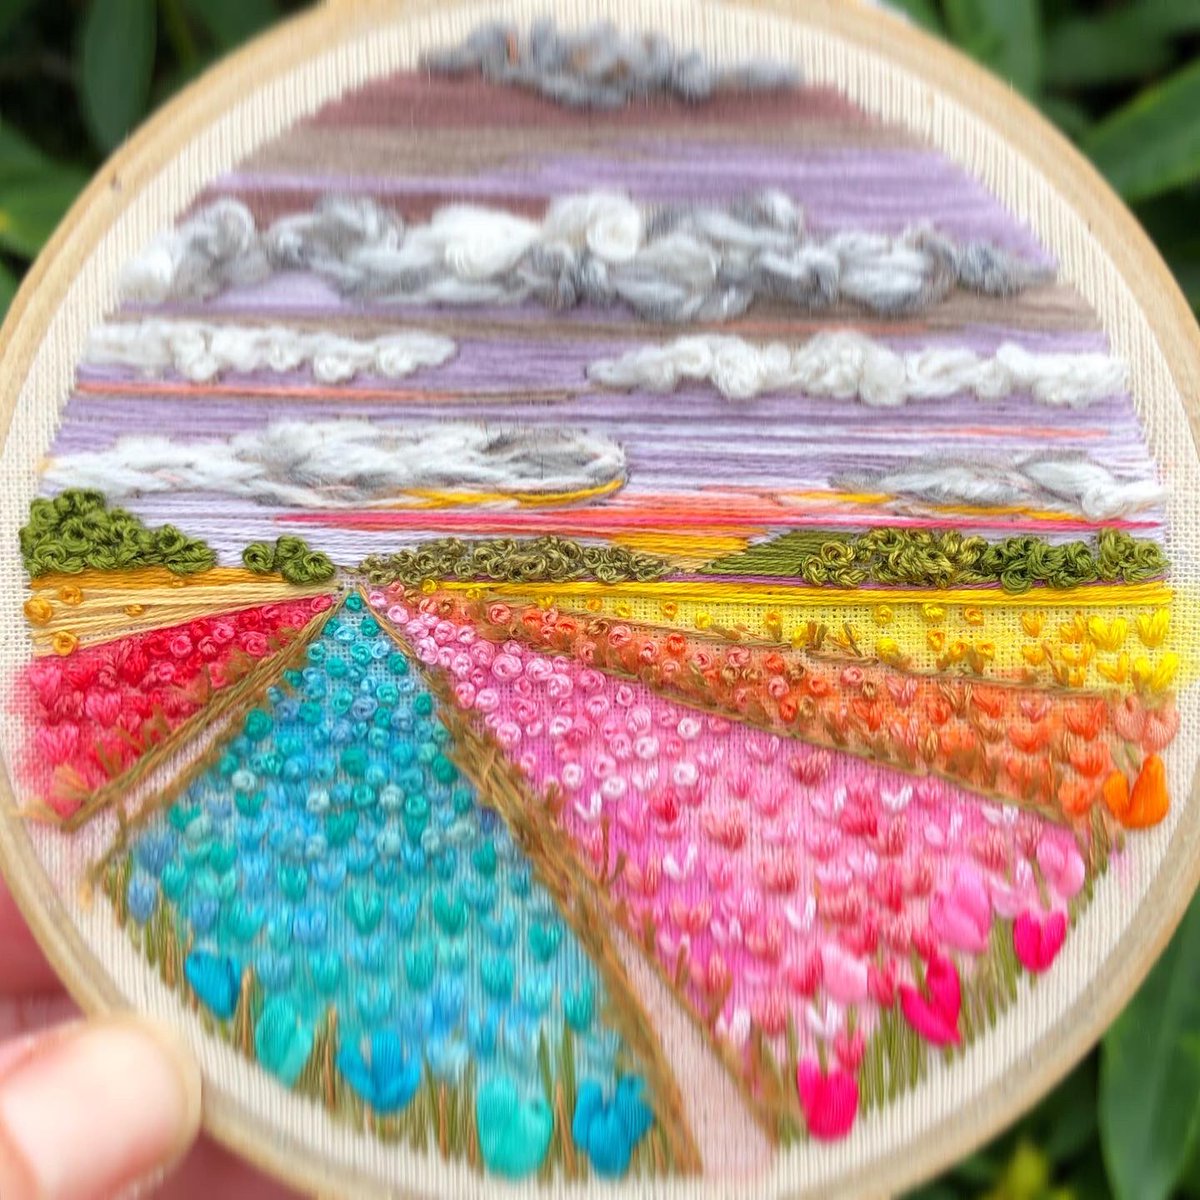 Something less bleak for your feed 
#arttwitter #embroidery #landscapeart #landscapeembroidery